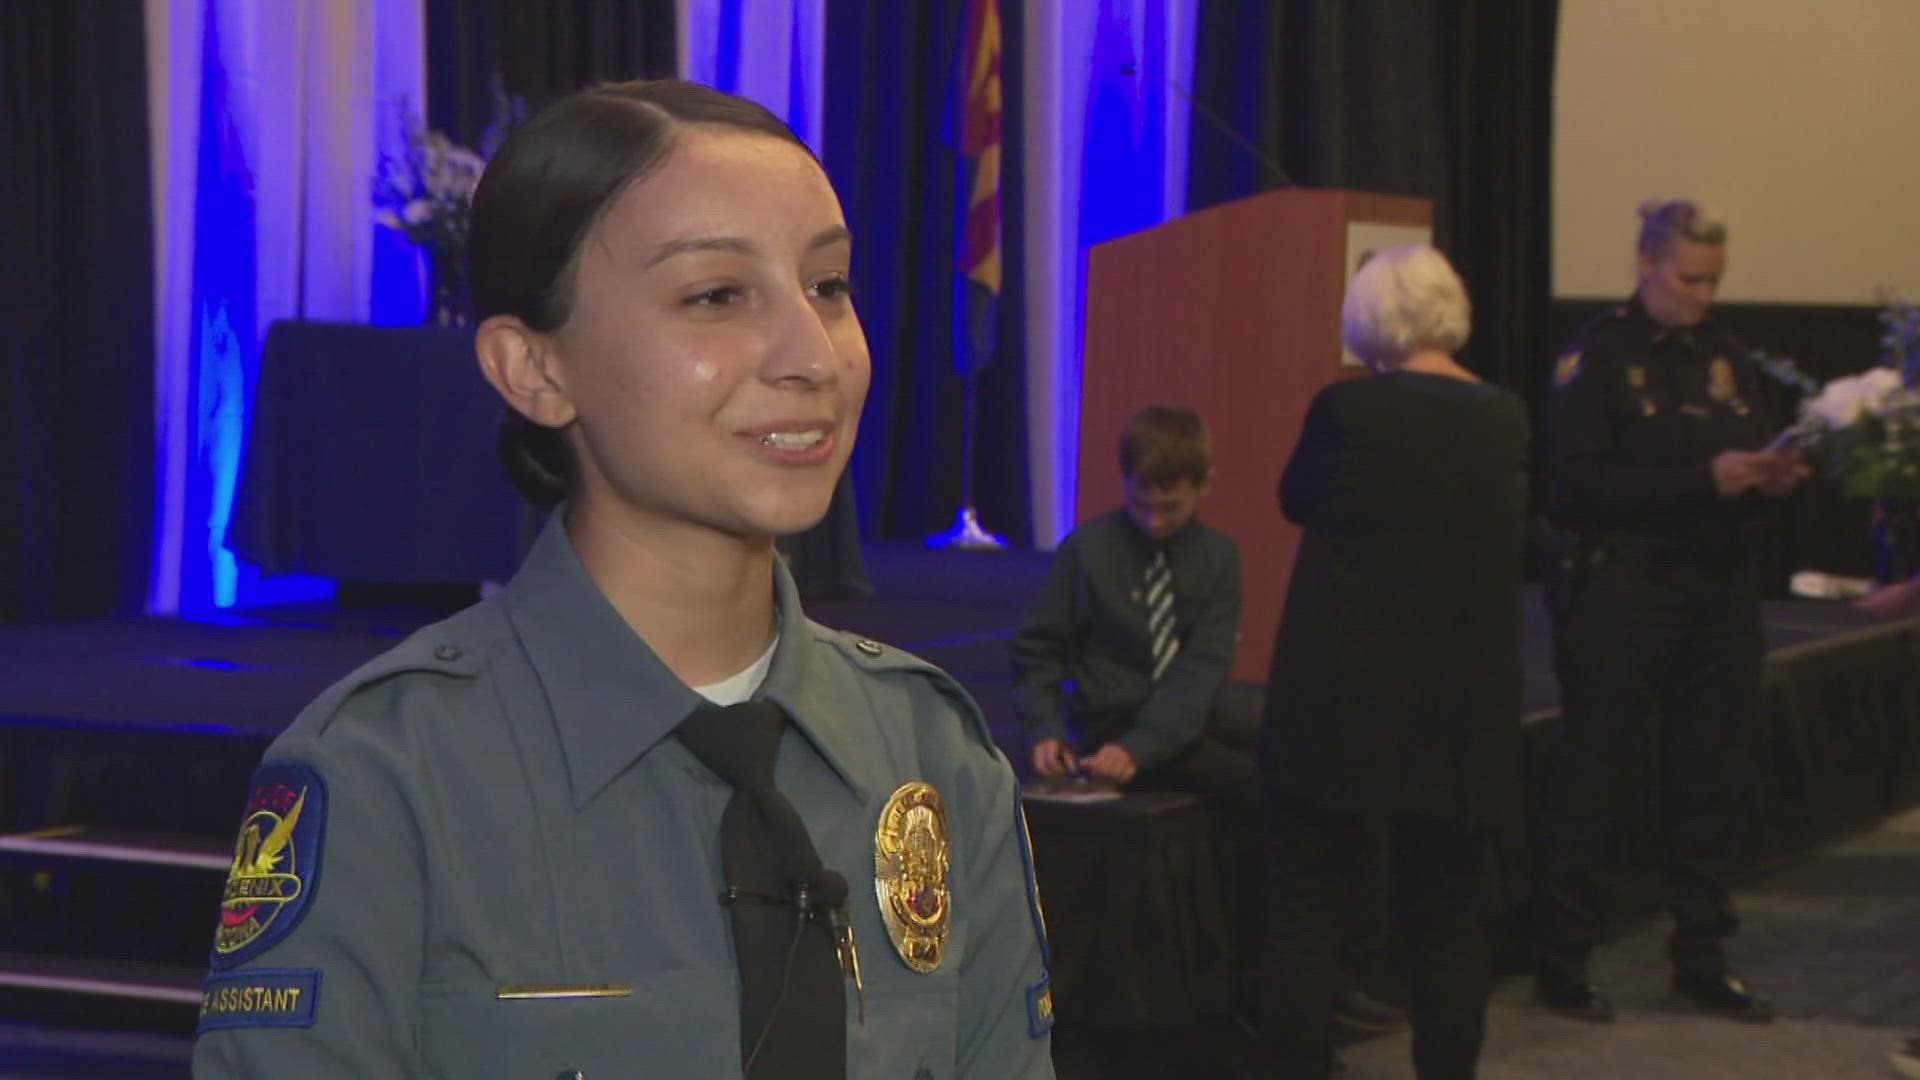 The event honors the women of the Phoenix Police Department who choose to serve their communities.